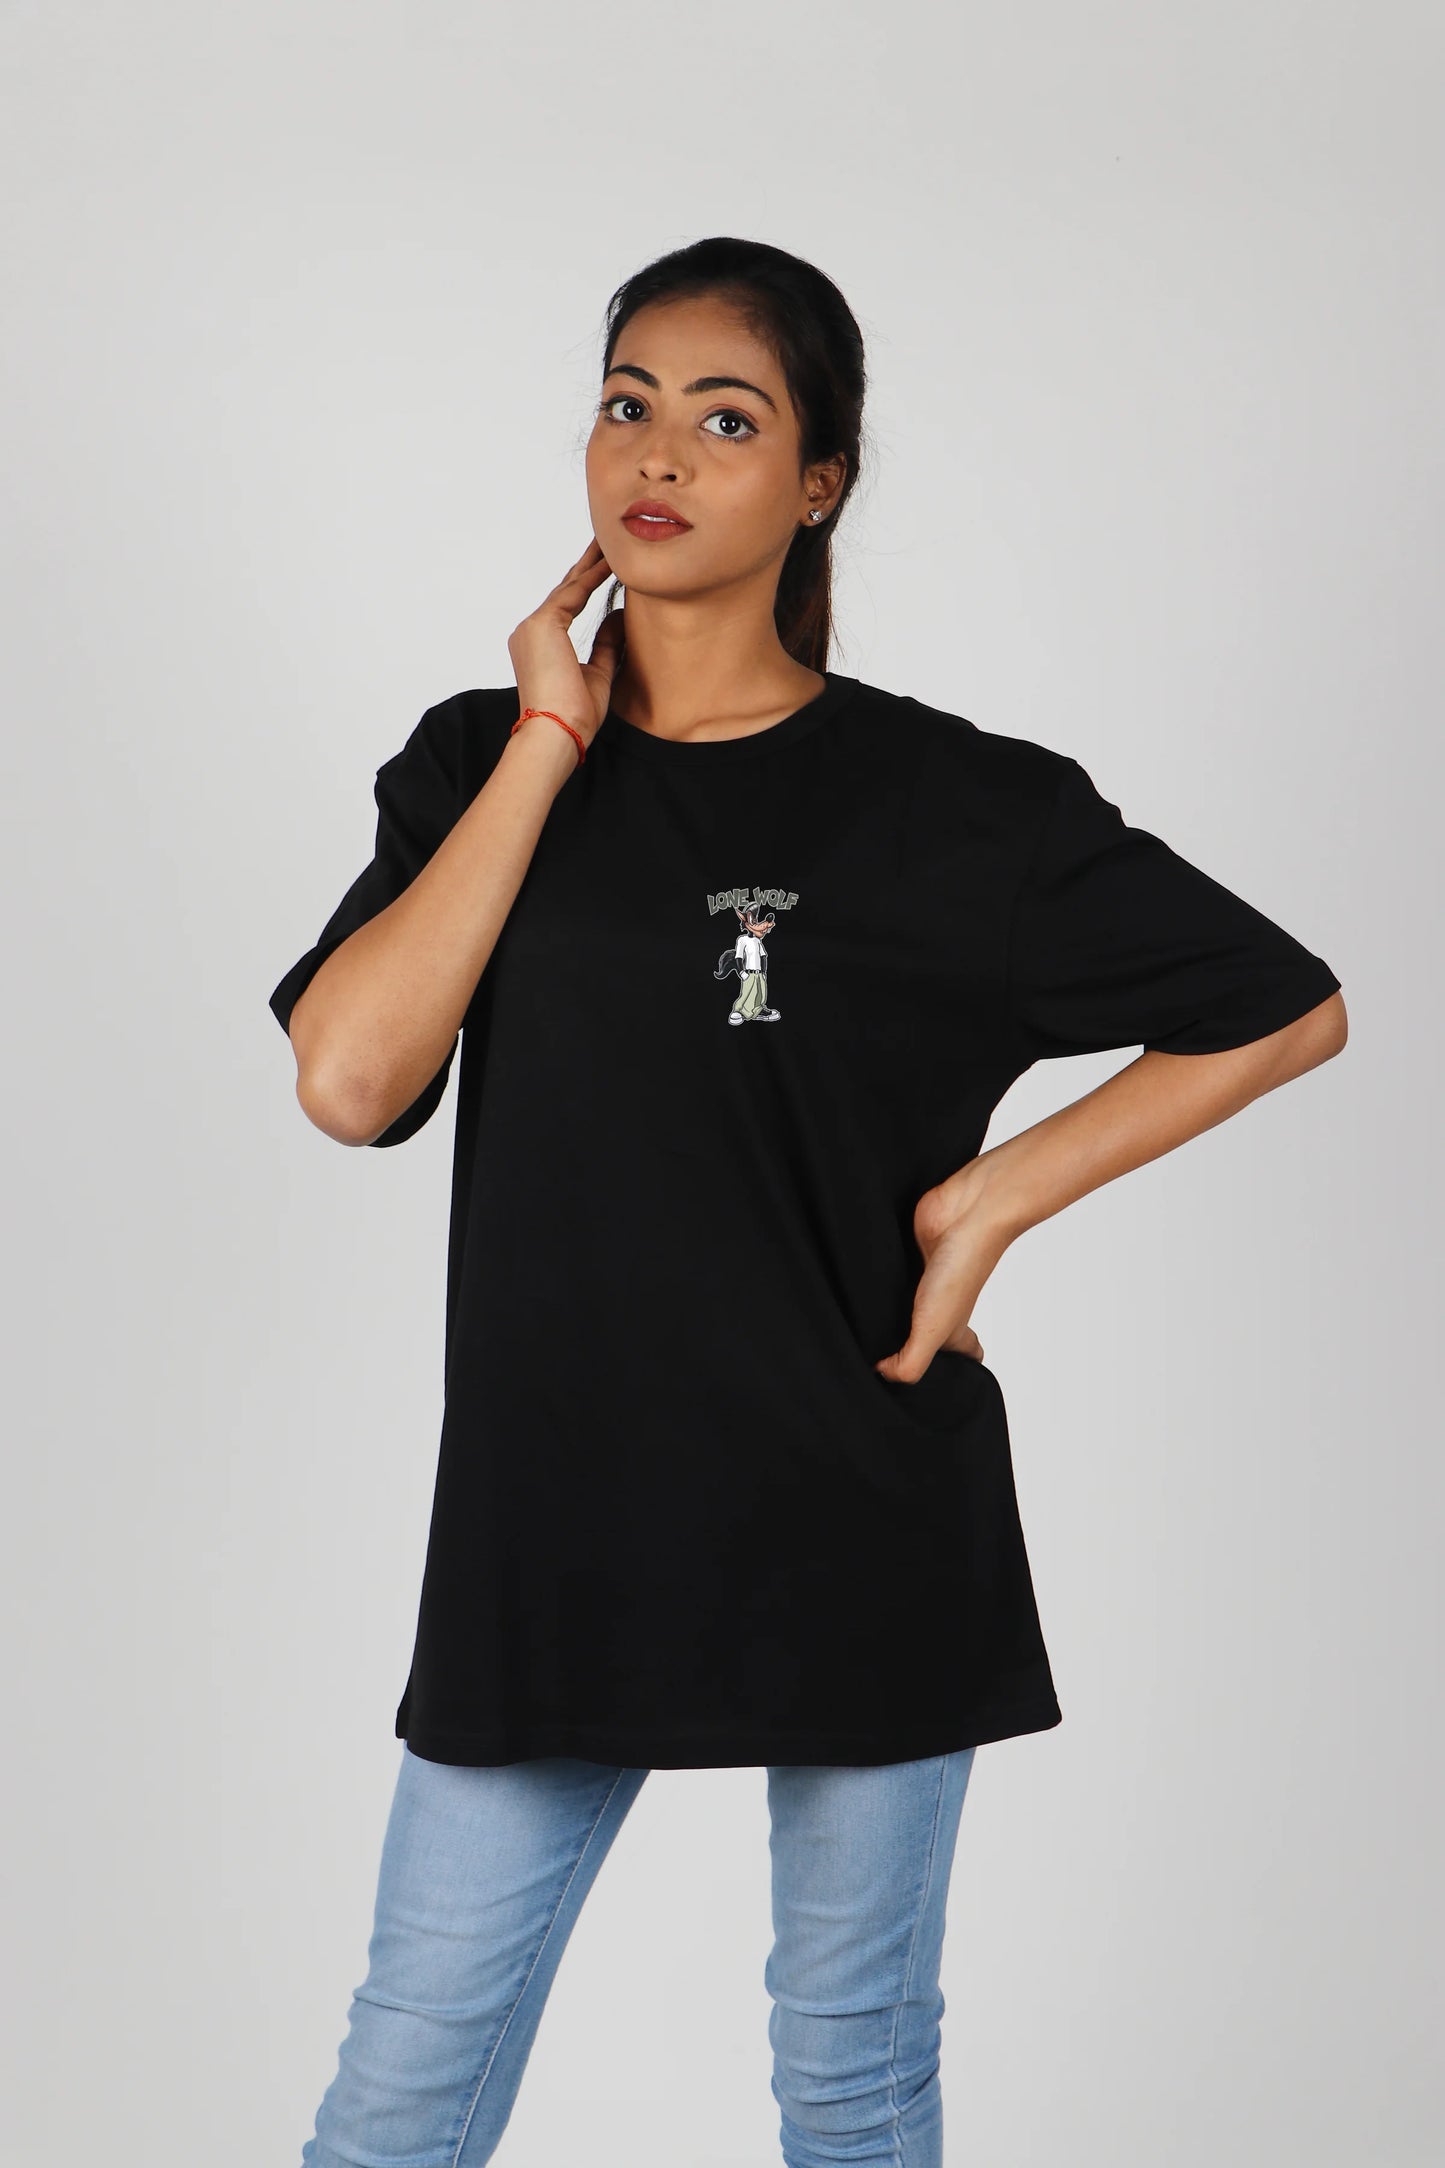 Communicate your style with this unique and expressive graphic T-shirt designed for women